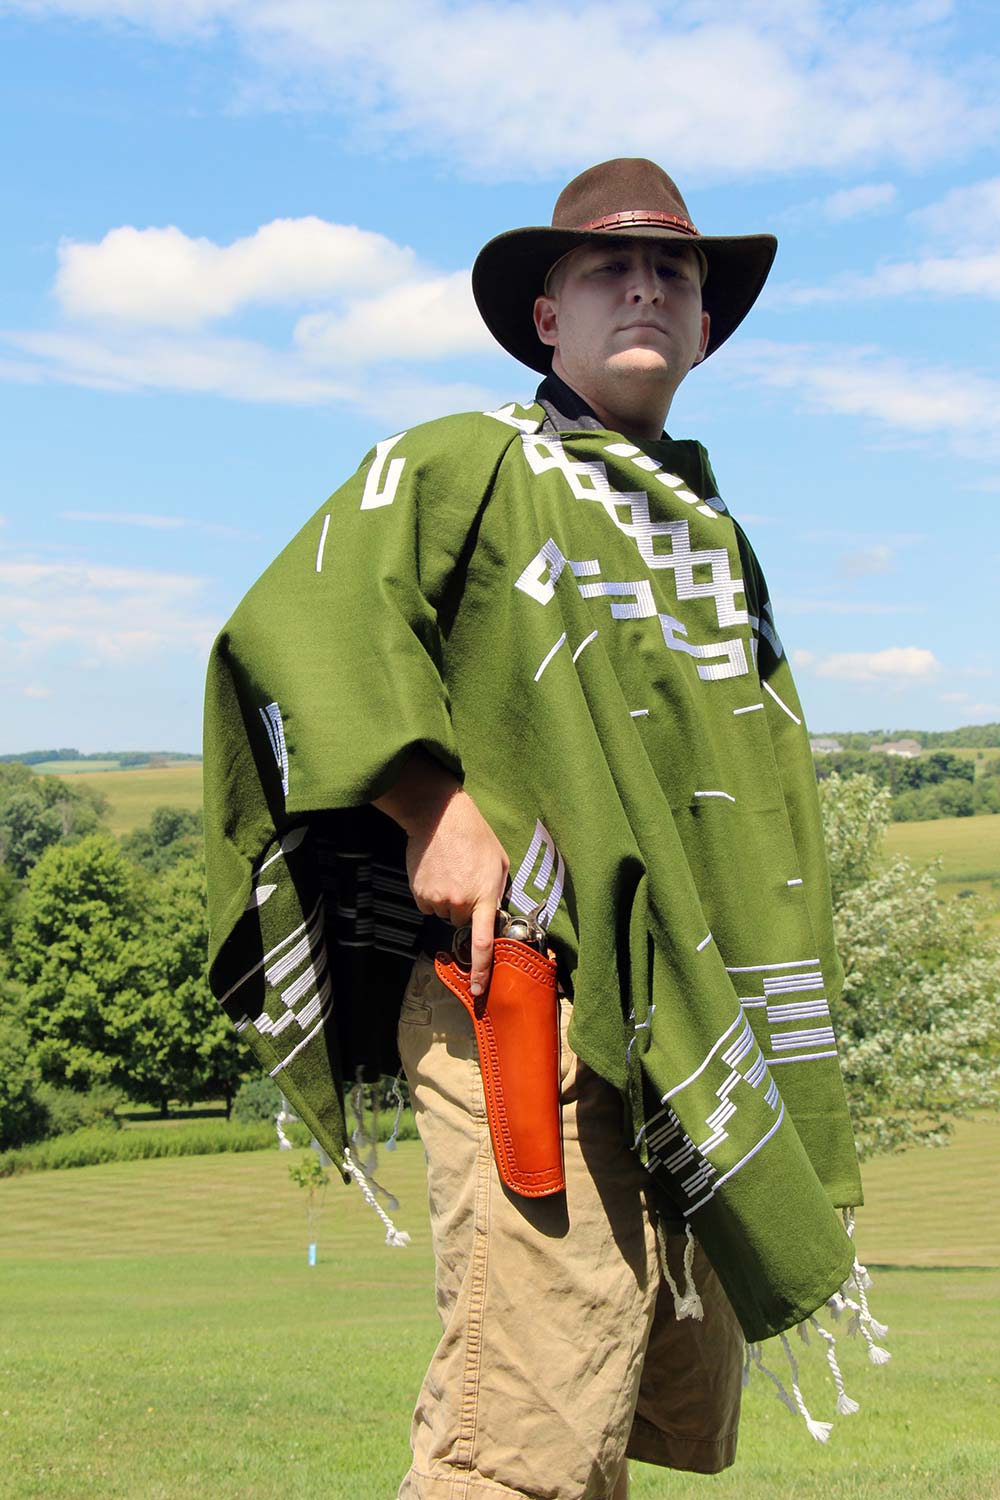 The wool Man-With-No-Name Poncho worn by the author’s son Sean